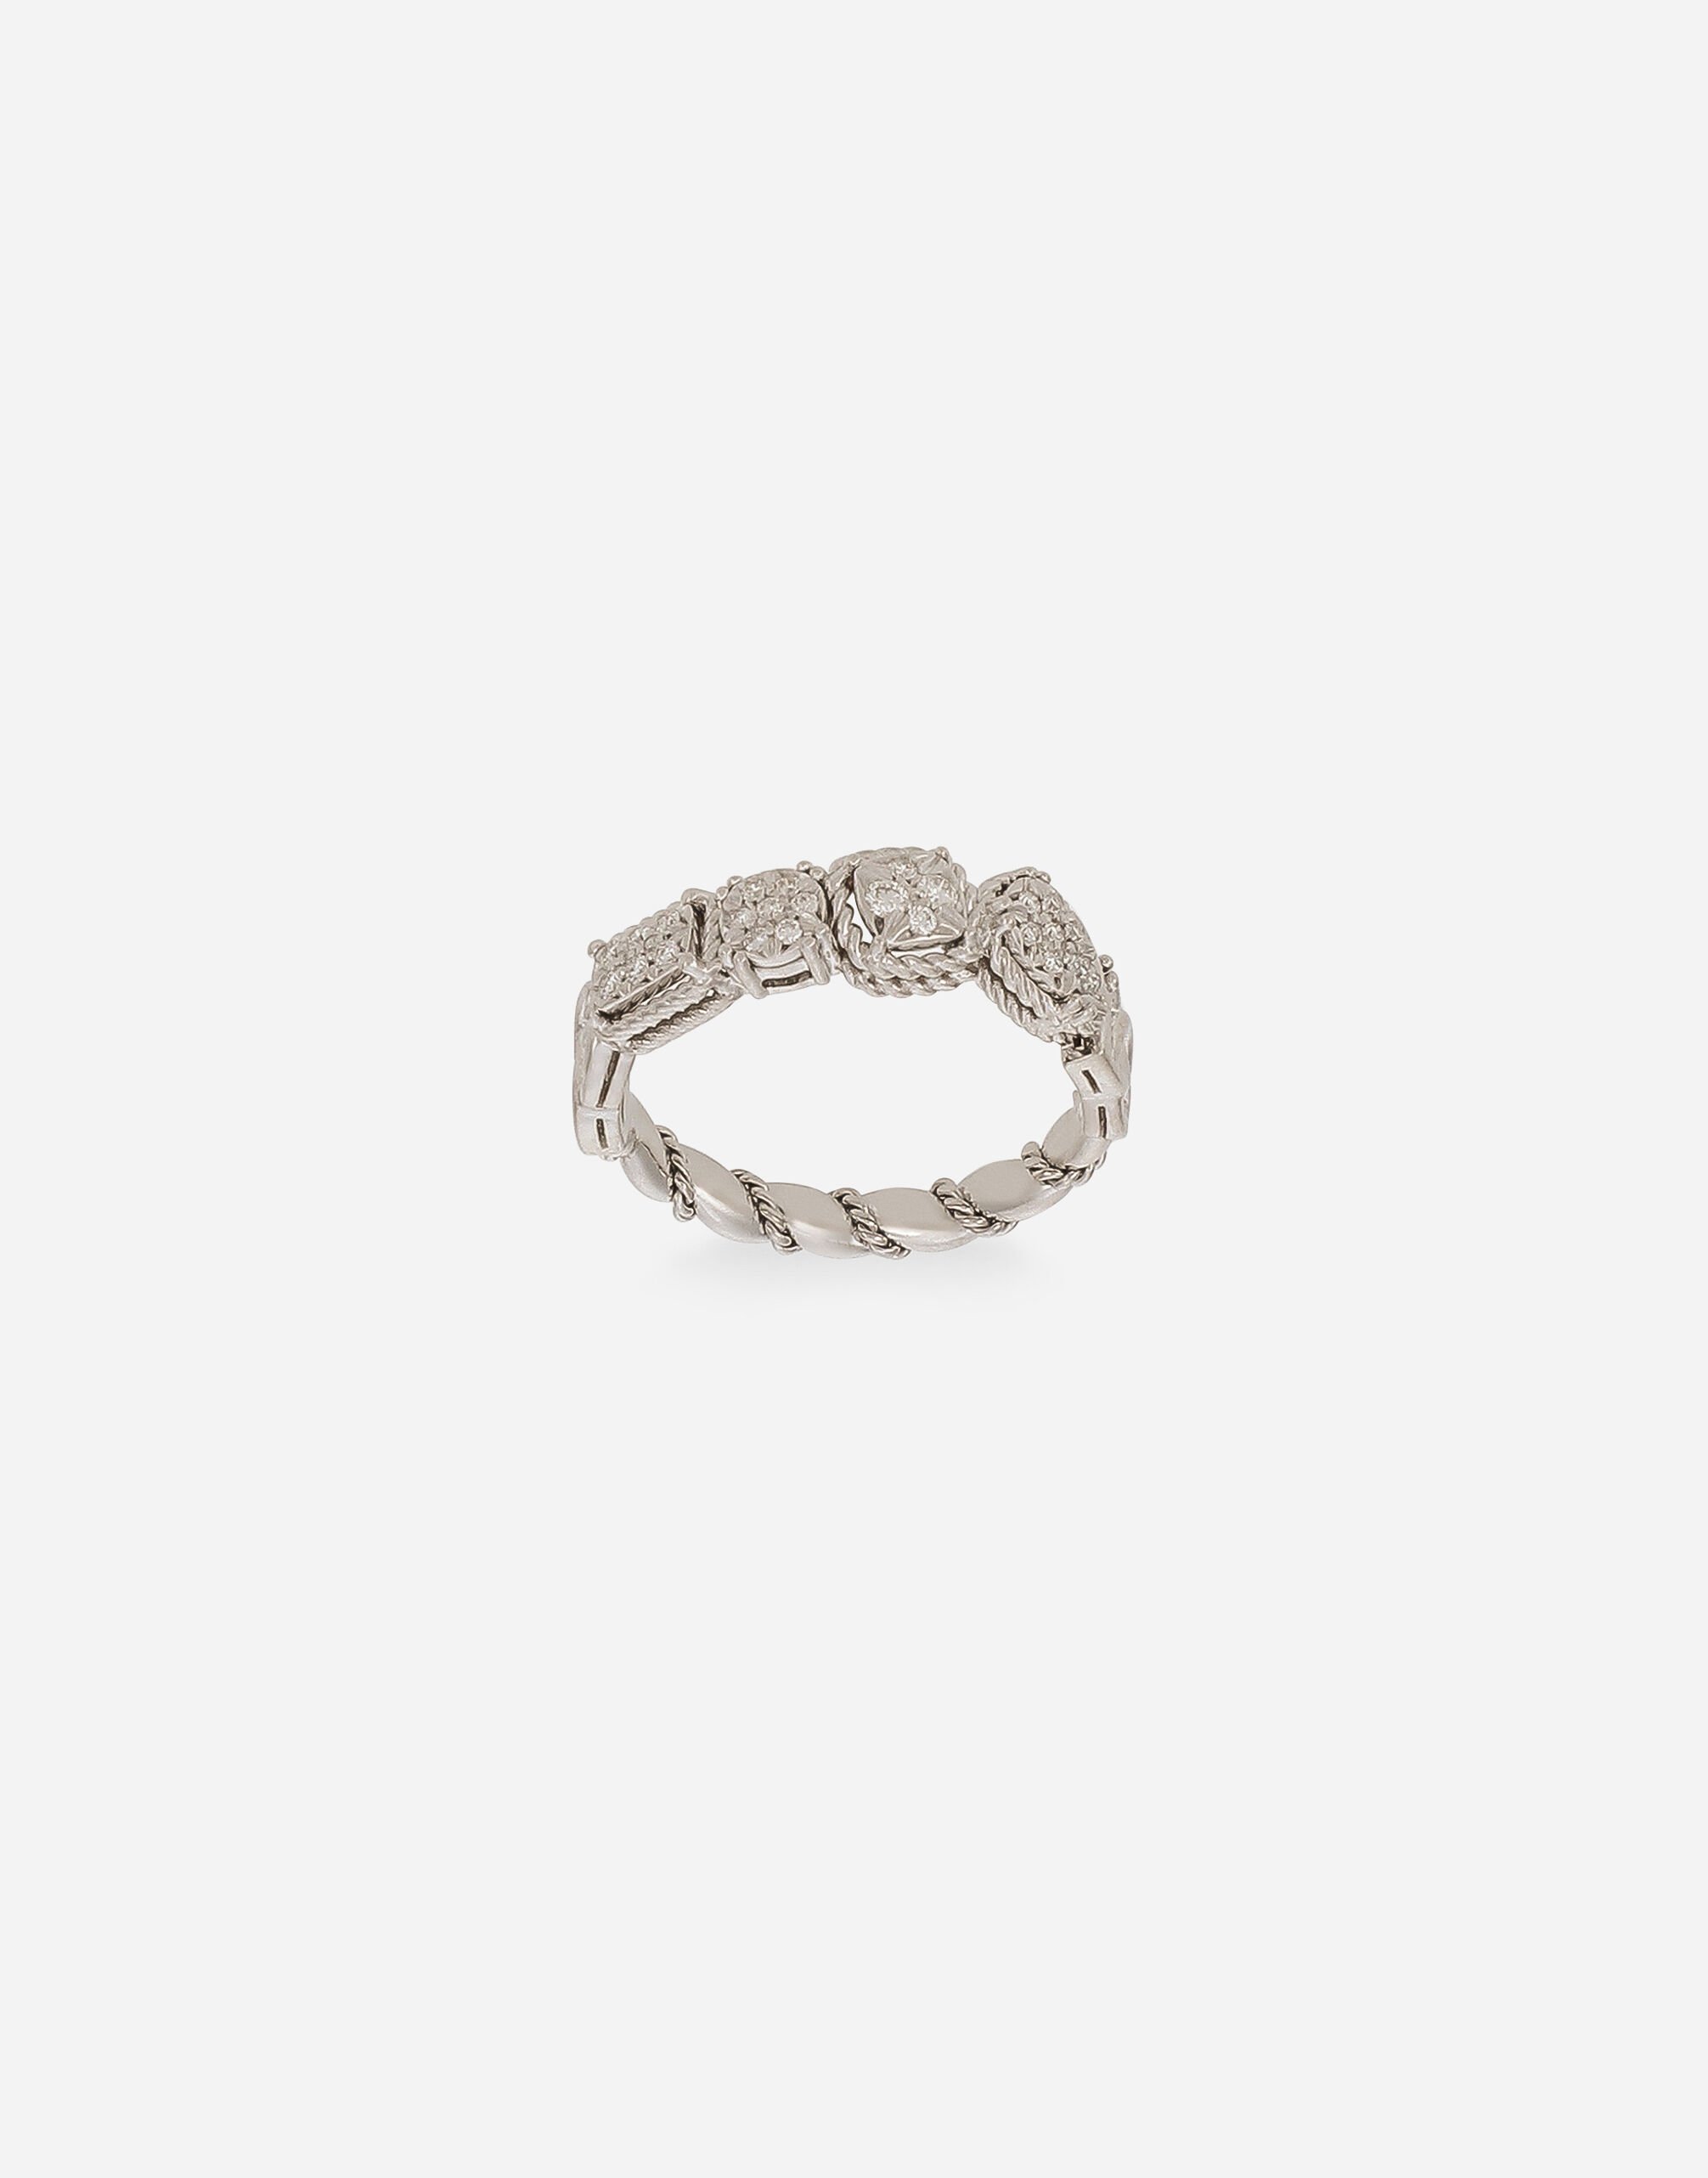 Dolce & Gabbana Easy Diamond ring in white gold 18kt and diamonds pavé Gold WRQA1GWQC01